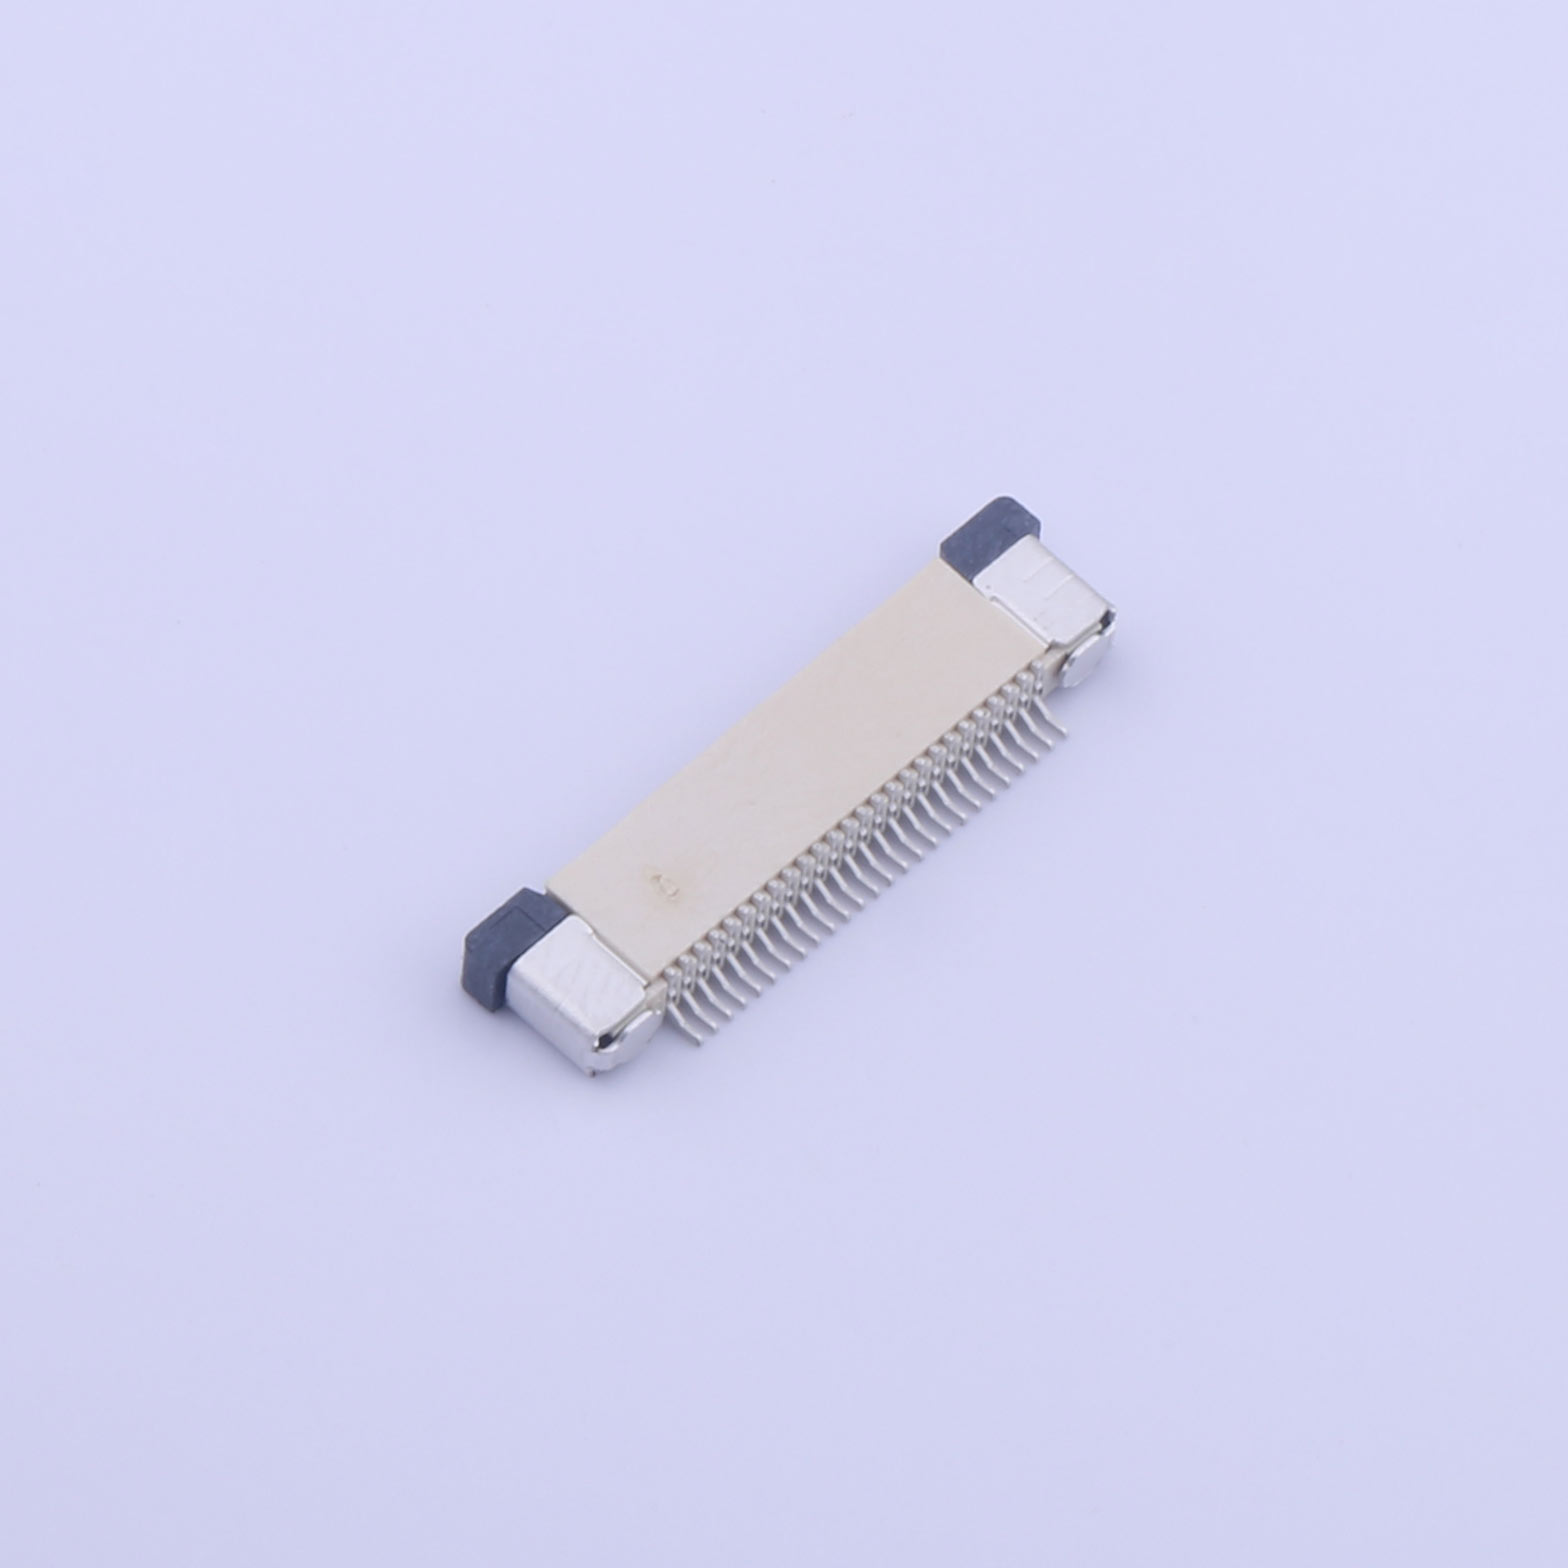 Kinghelm 0.5mm Pitch FPC FFC Connector 28P Height 2mm Drawer type lower connection Contact SMT FPC Connector